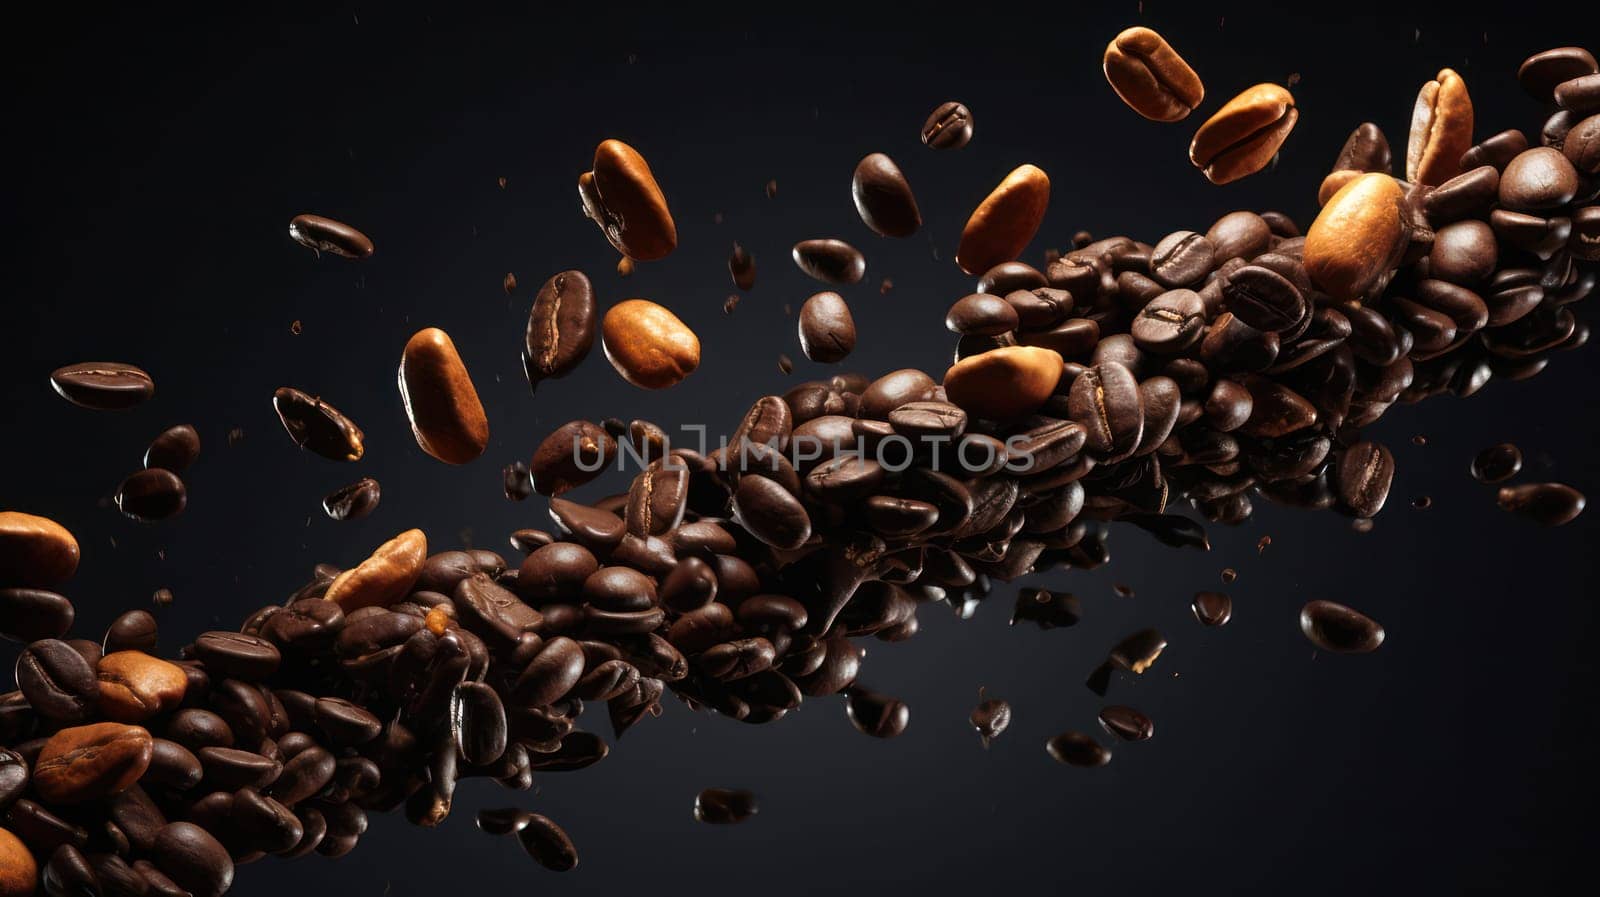 Roasted Caffeine Kick: A Close-Up Capture of Fresh, Aromatic Coffee Beans on a Wooden Table by Vichizh